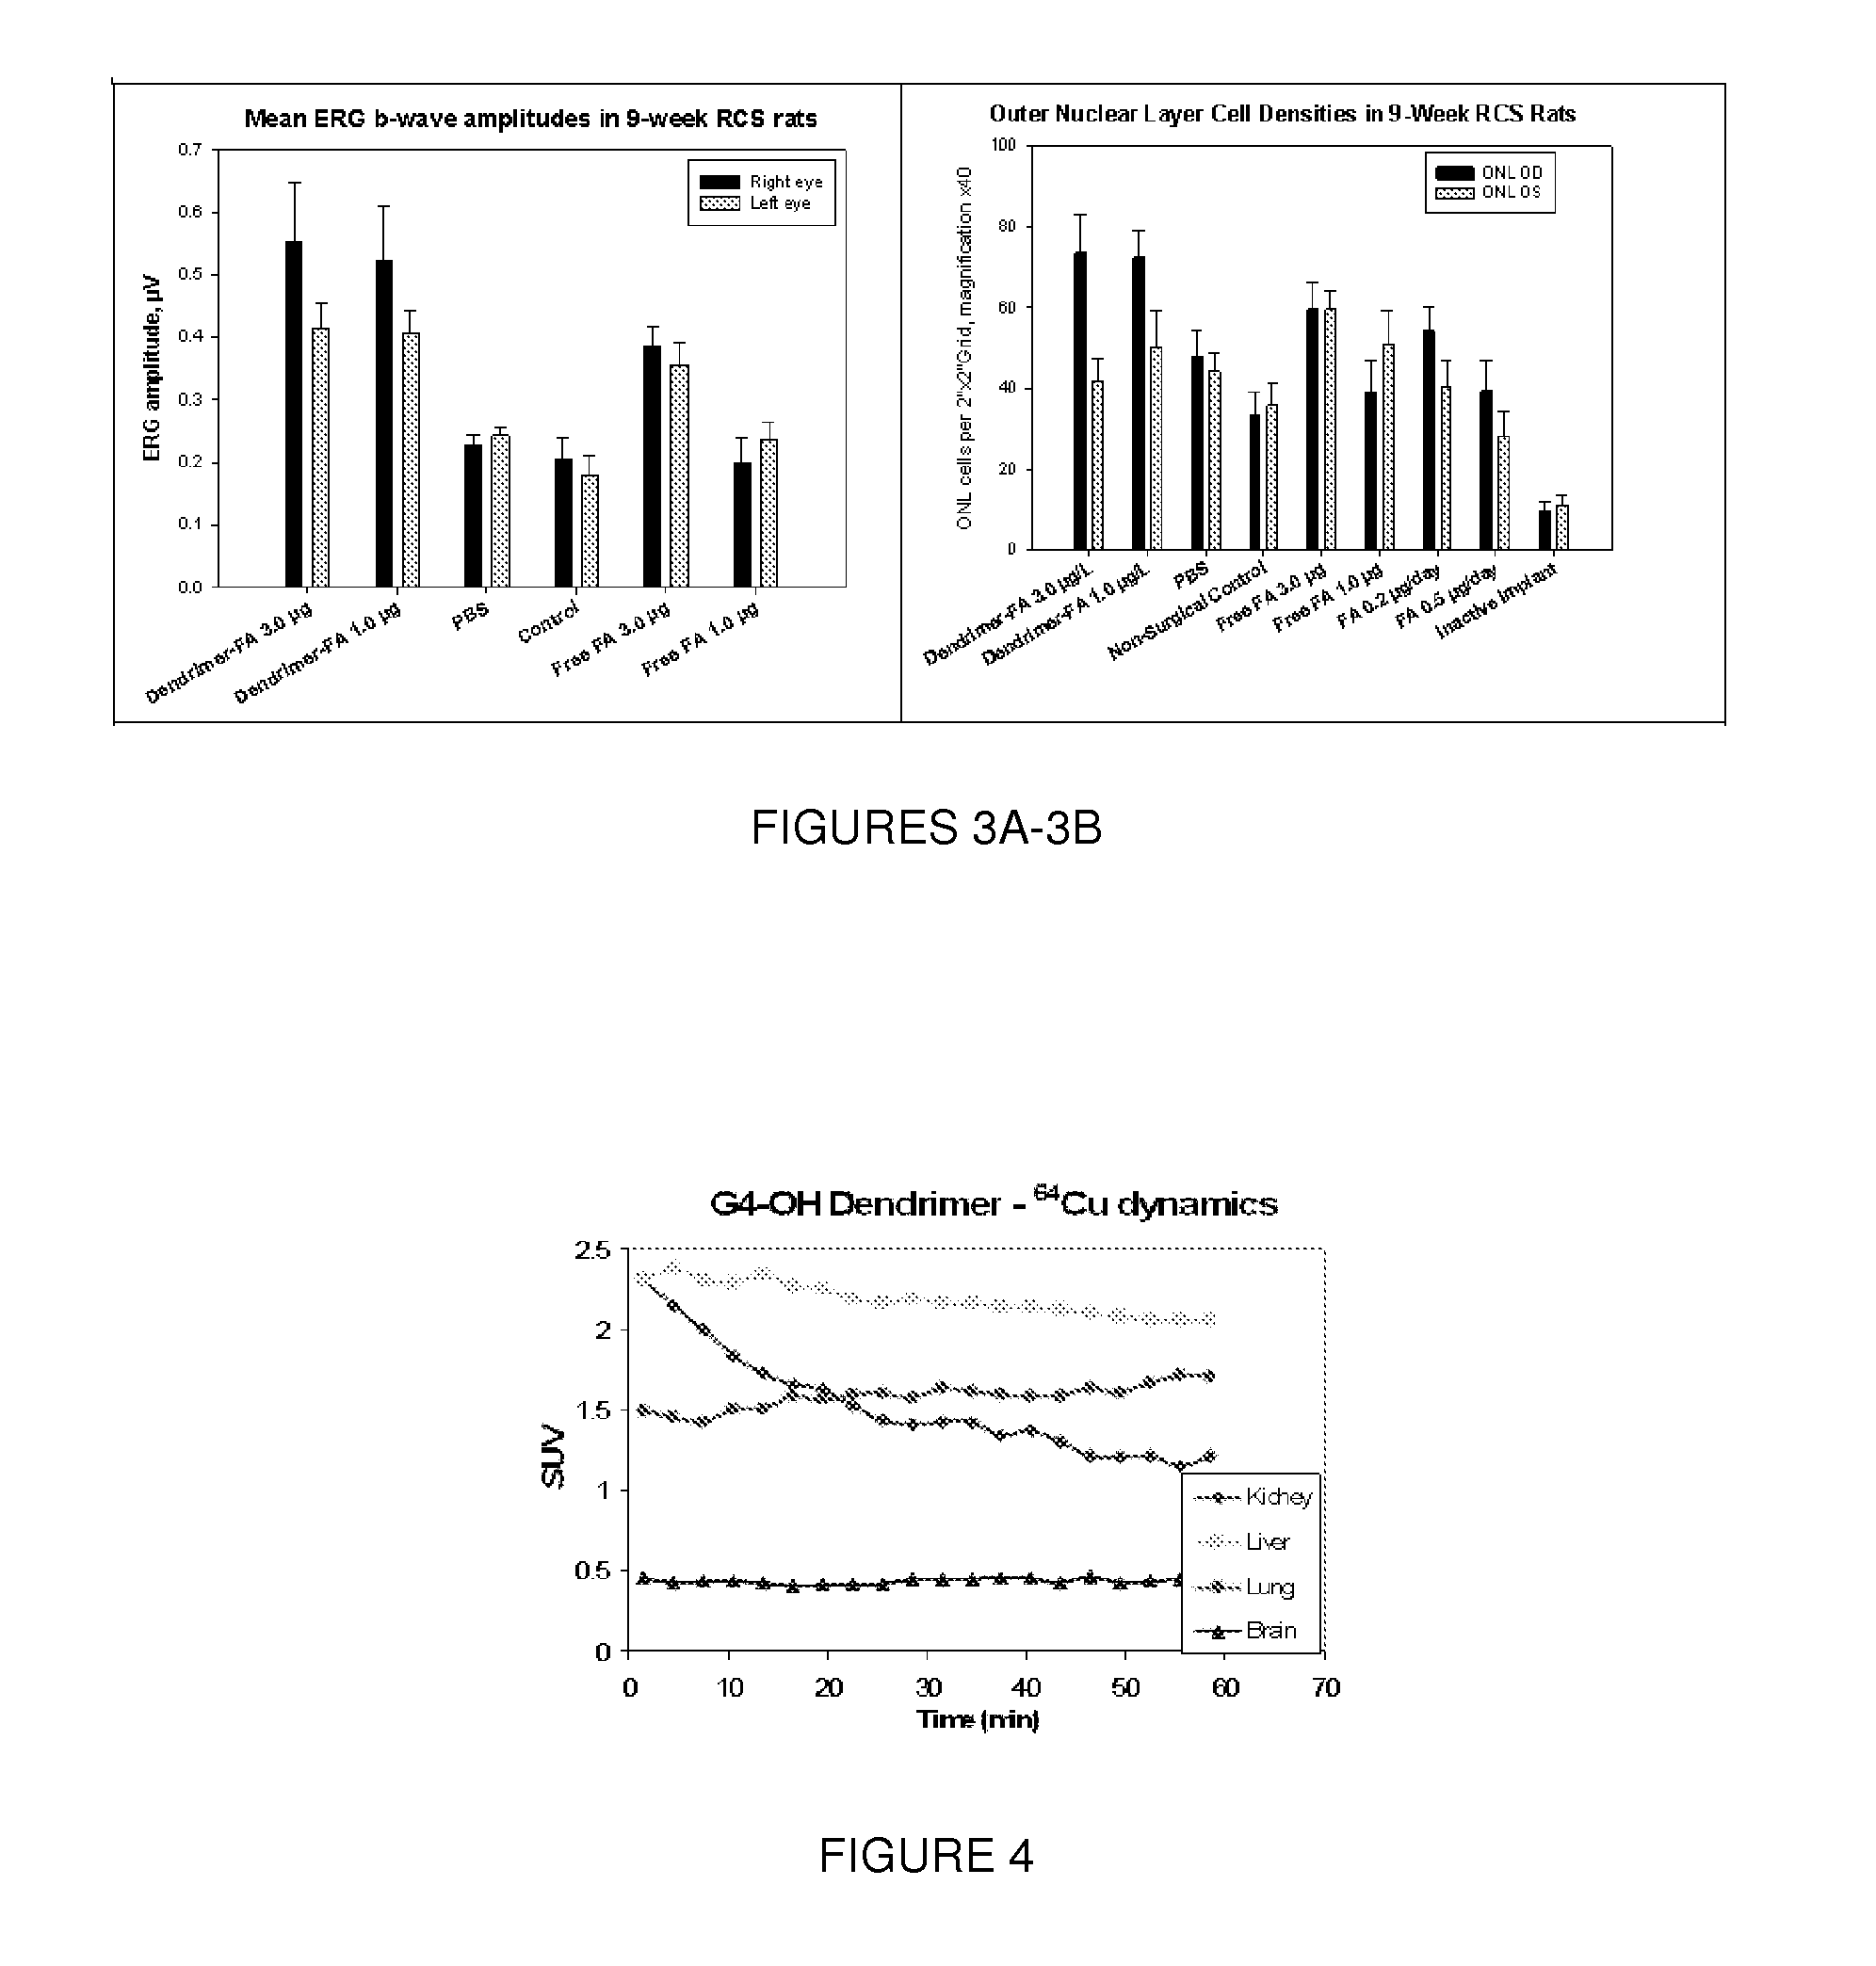 Dendrimers for sustained release of compounds